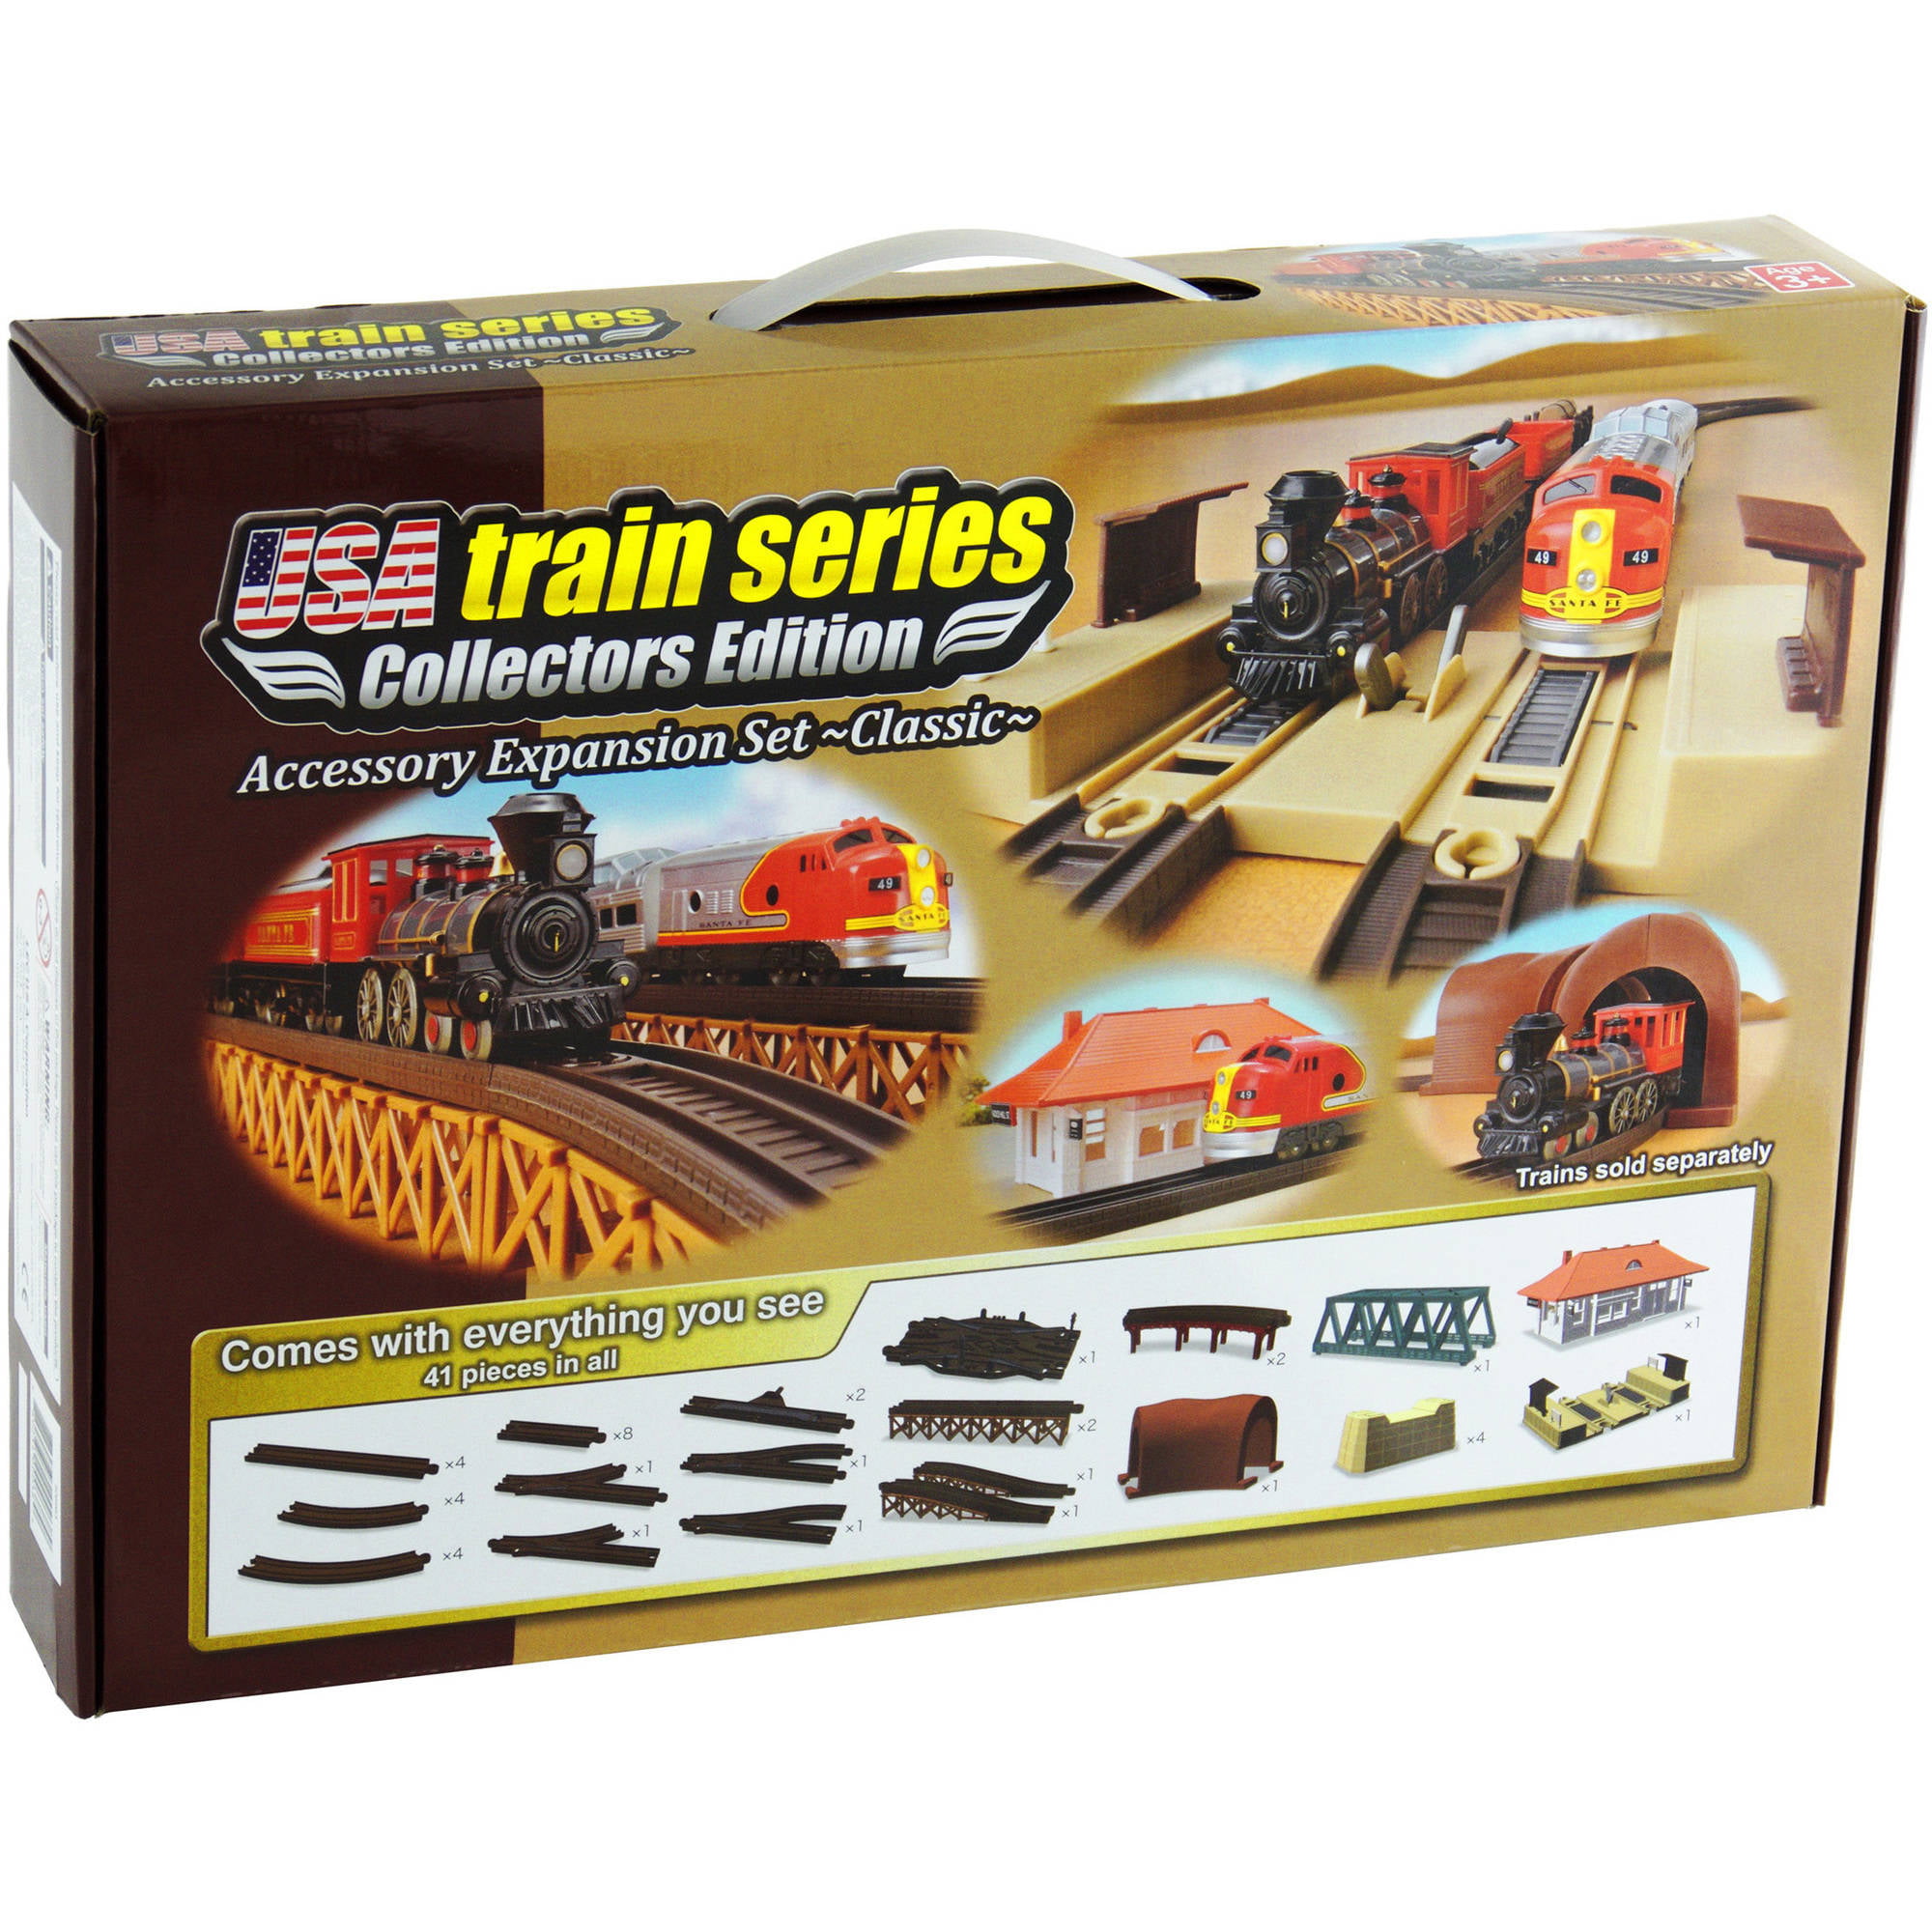 Train Series Battery Operated Train Accessory LEC U.S.A Track No 8 Outer Curve Train Track Grey 16Piece 